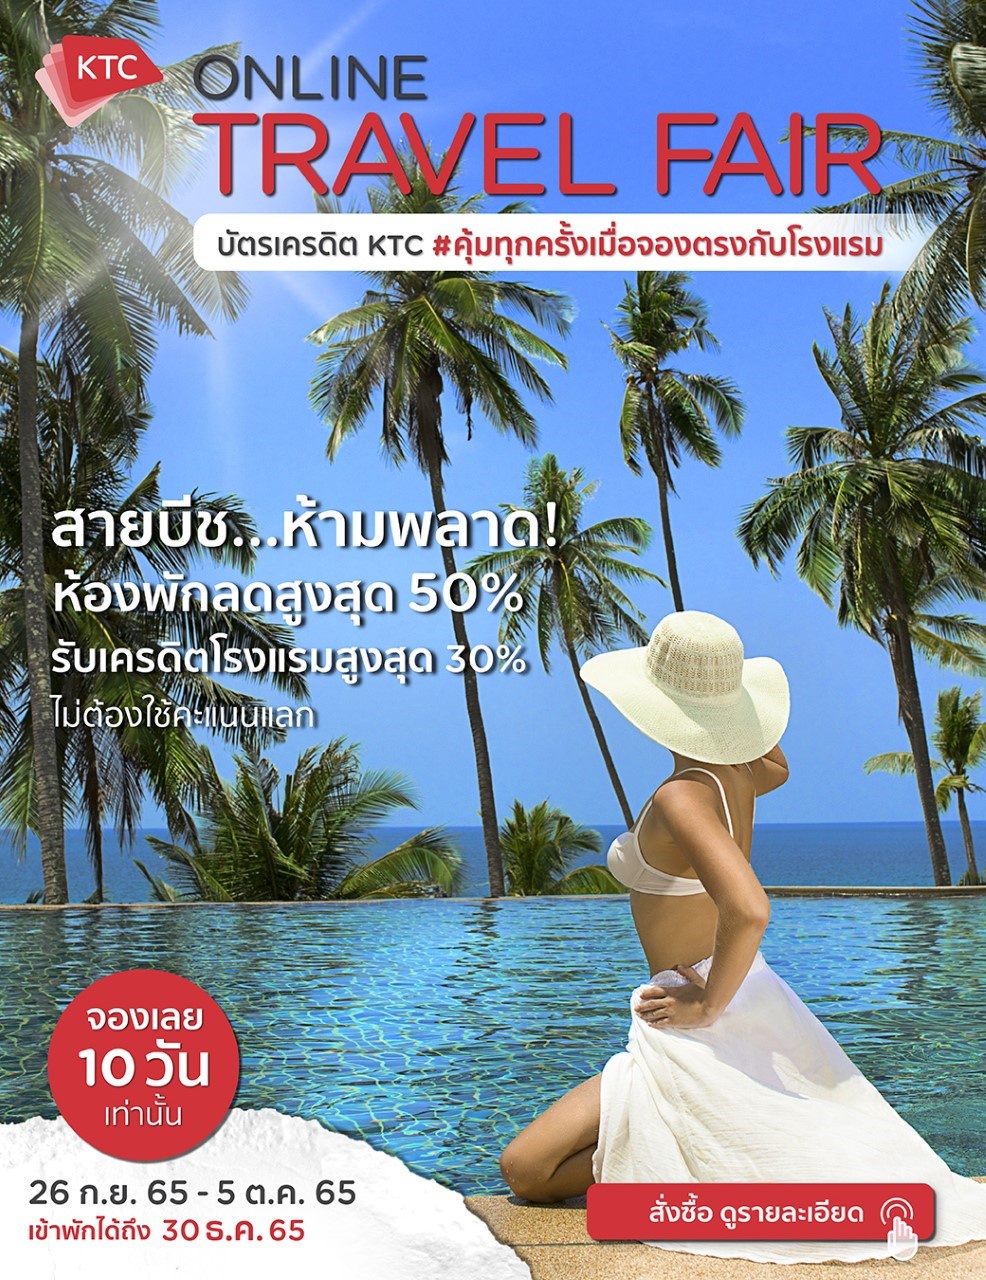 KTC arranges the 4th KTC Online Travel Fair, Beach Lovers Don't Miss Out! Special Price Vouchers for Hotels in